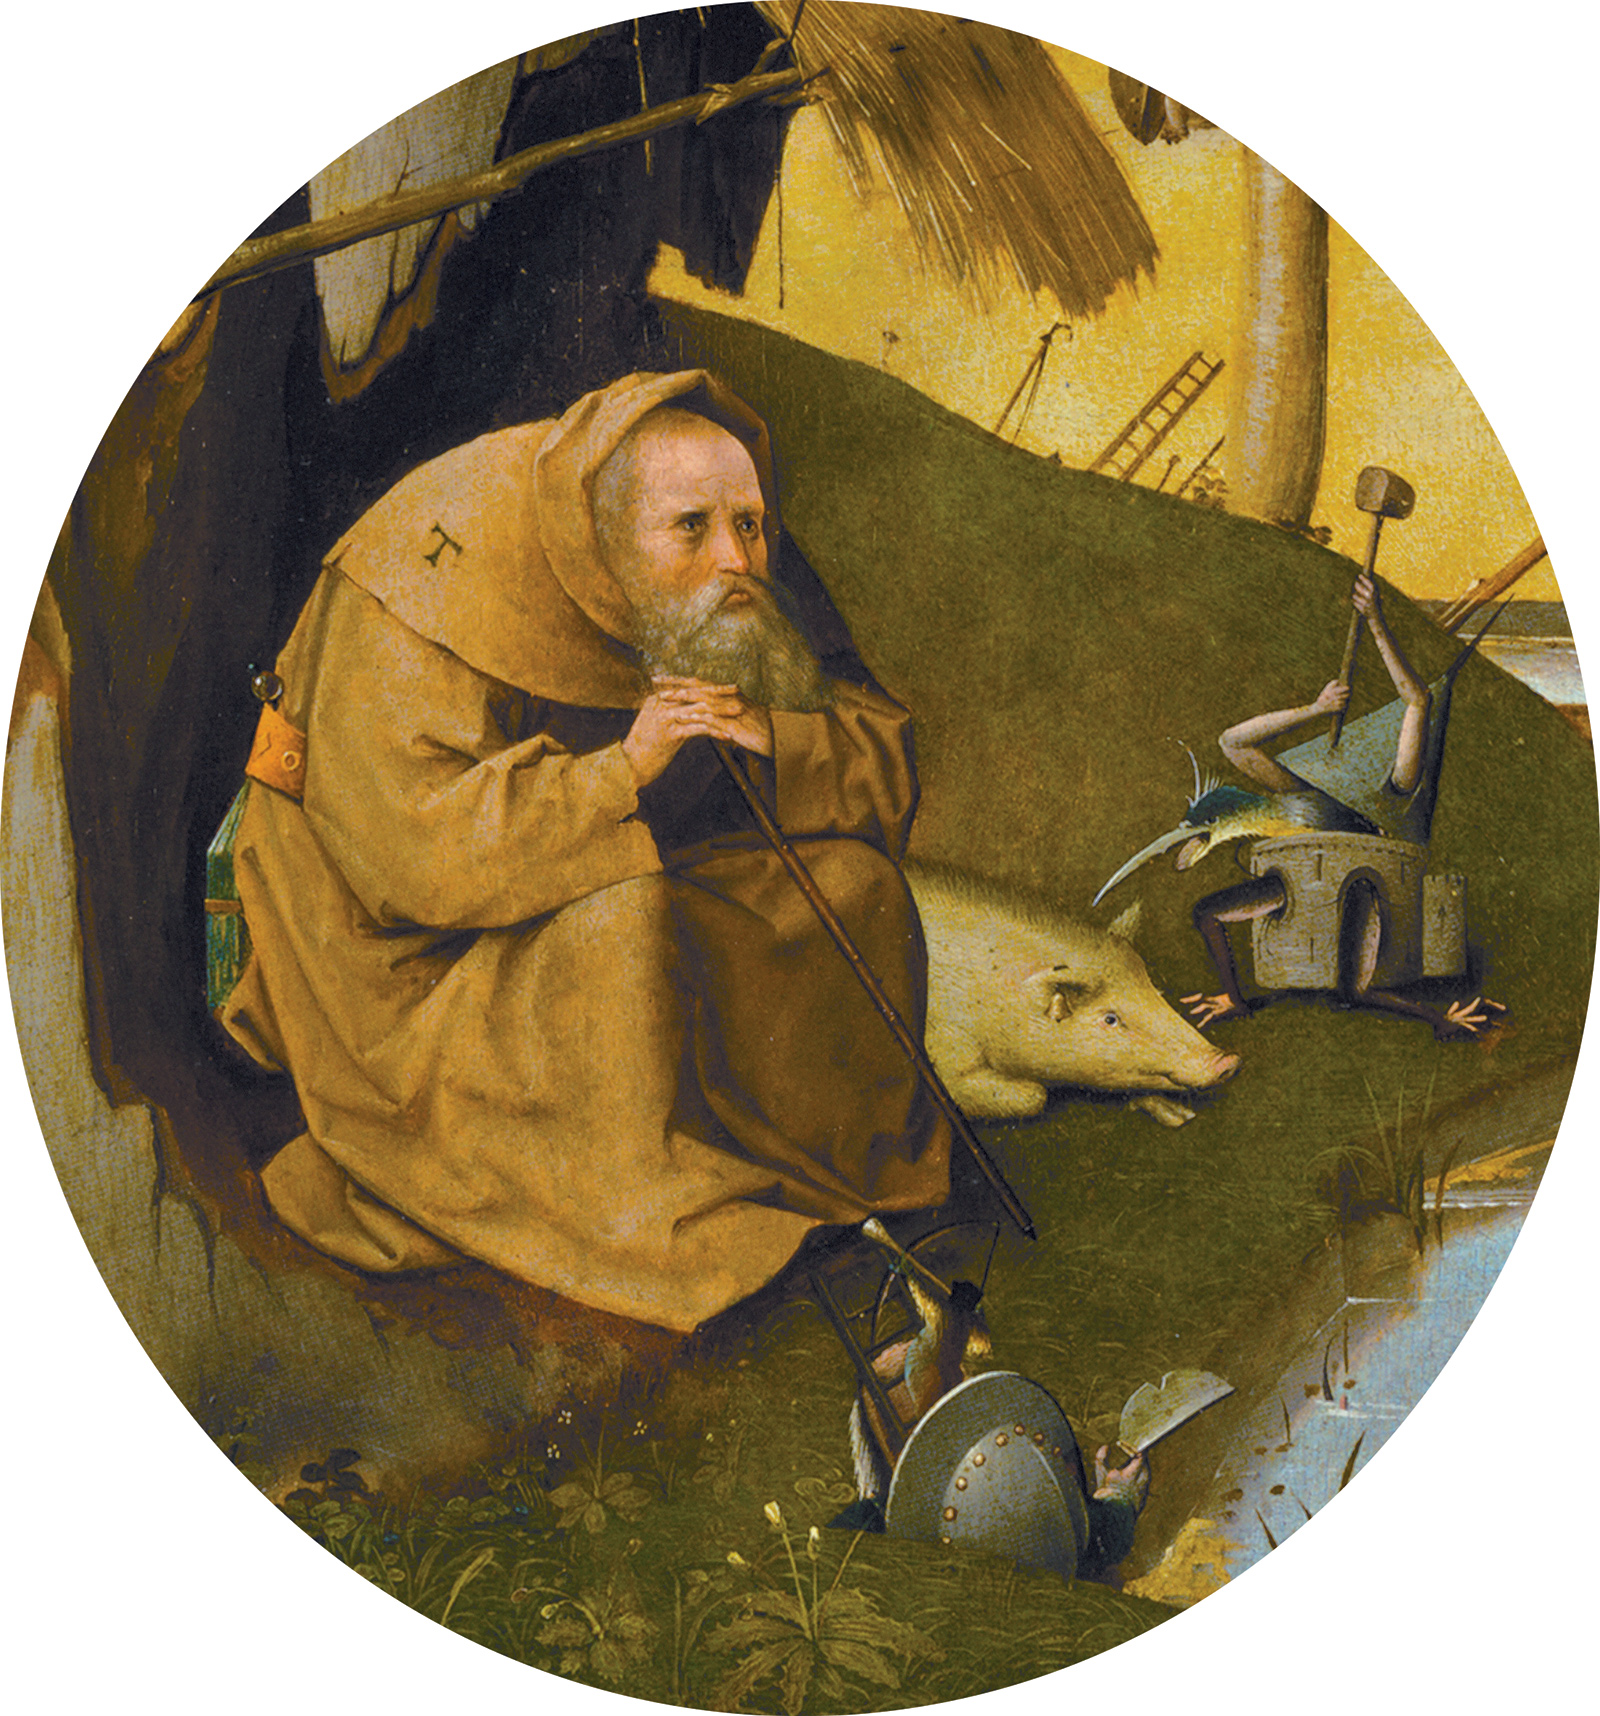 Detail of Hieronymus Bosch’s The Temptations of Saint Anthony, circa 1510–1515; from ‘Bosch: The Fifth Centenary Exhibition,’ on view at the Museo Nacional del Prado, Madrid, until September 11, 2016.